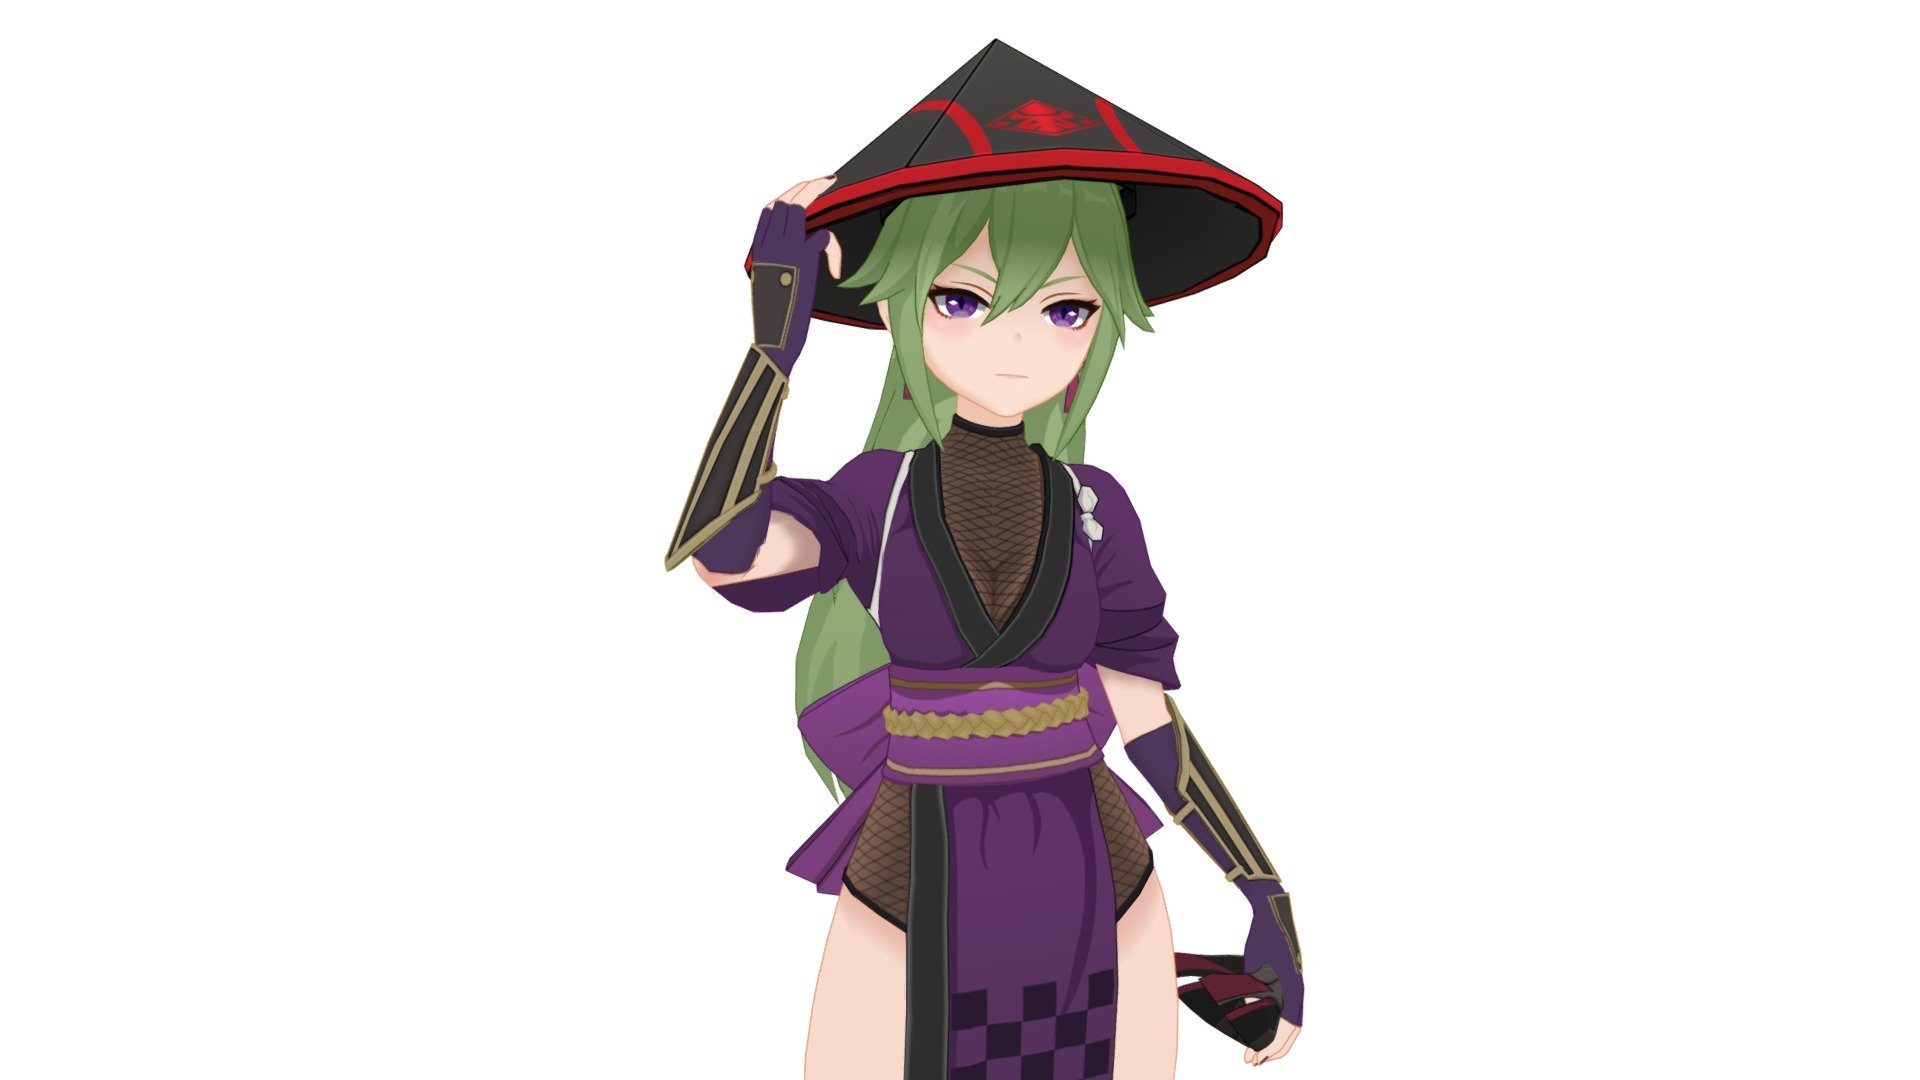 I made Kuki Shinobu fan art from Game Genshin Impact. but in a Arataki gang style outfit.
this is also my commission work on fiverr from sunndavar

Modeling : Blender

Texture : Substance Painter &amp; Photoshop CC

RIgging &amp; Pose : Blender

uploaded using Sketchfab for Blender - 1.5.0

Concept art reference : https://www.artstation.com/artwork/03kQqK

You can find me on ArtStation : https://www.artstation.com/rezapp

I’m open for commisions on fiverr : https://www.fiverr.com/share/EPNk58 - Kuki Shinobu - Genshin Impact - 3D model by Rezapp 3d model